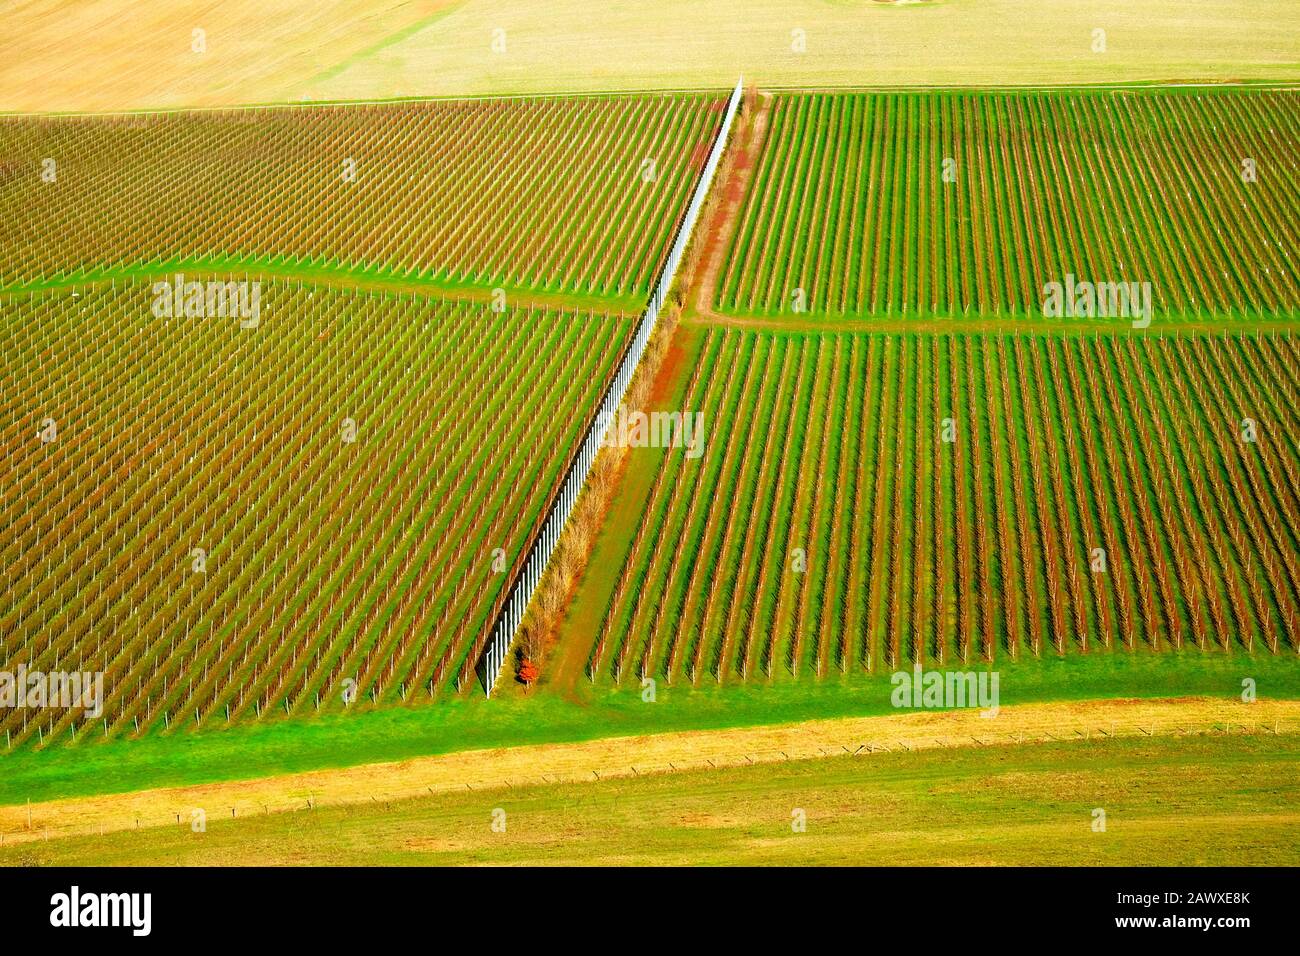 Sussex, England, United Kingdom, wine growing region, hundreds of lines of grape vines in an English vineyard growing in straight lines with green gra Stock Photo